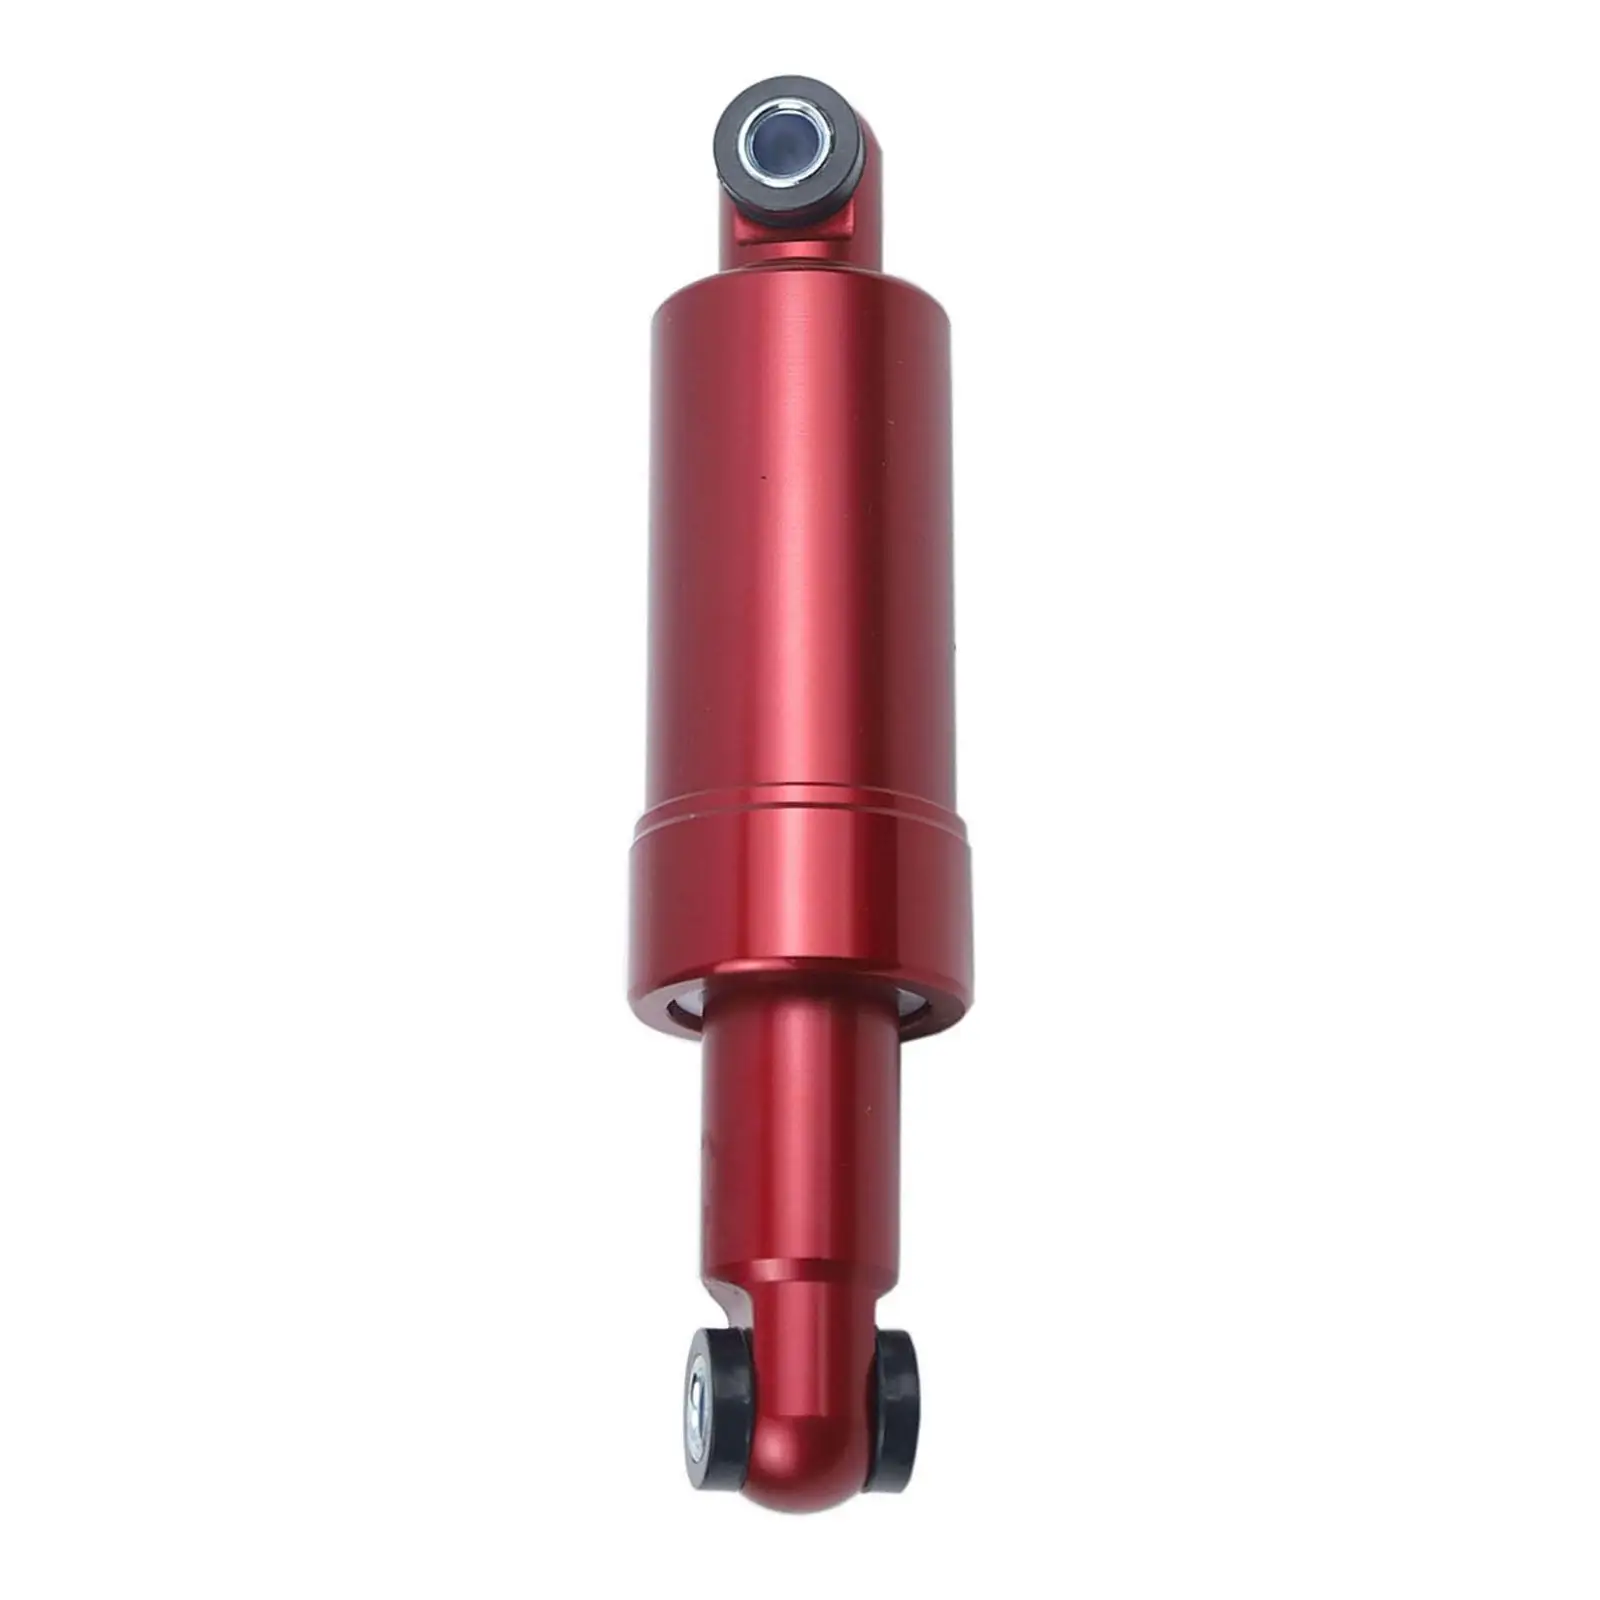 Mountain Bike Shock Absorber Replace for Folding Scooter Accessories